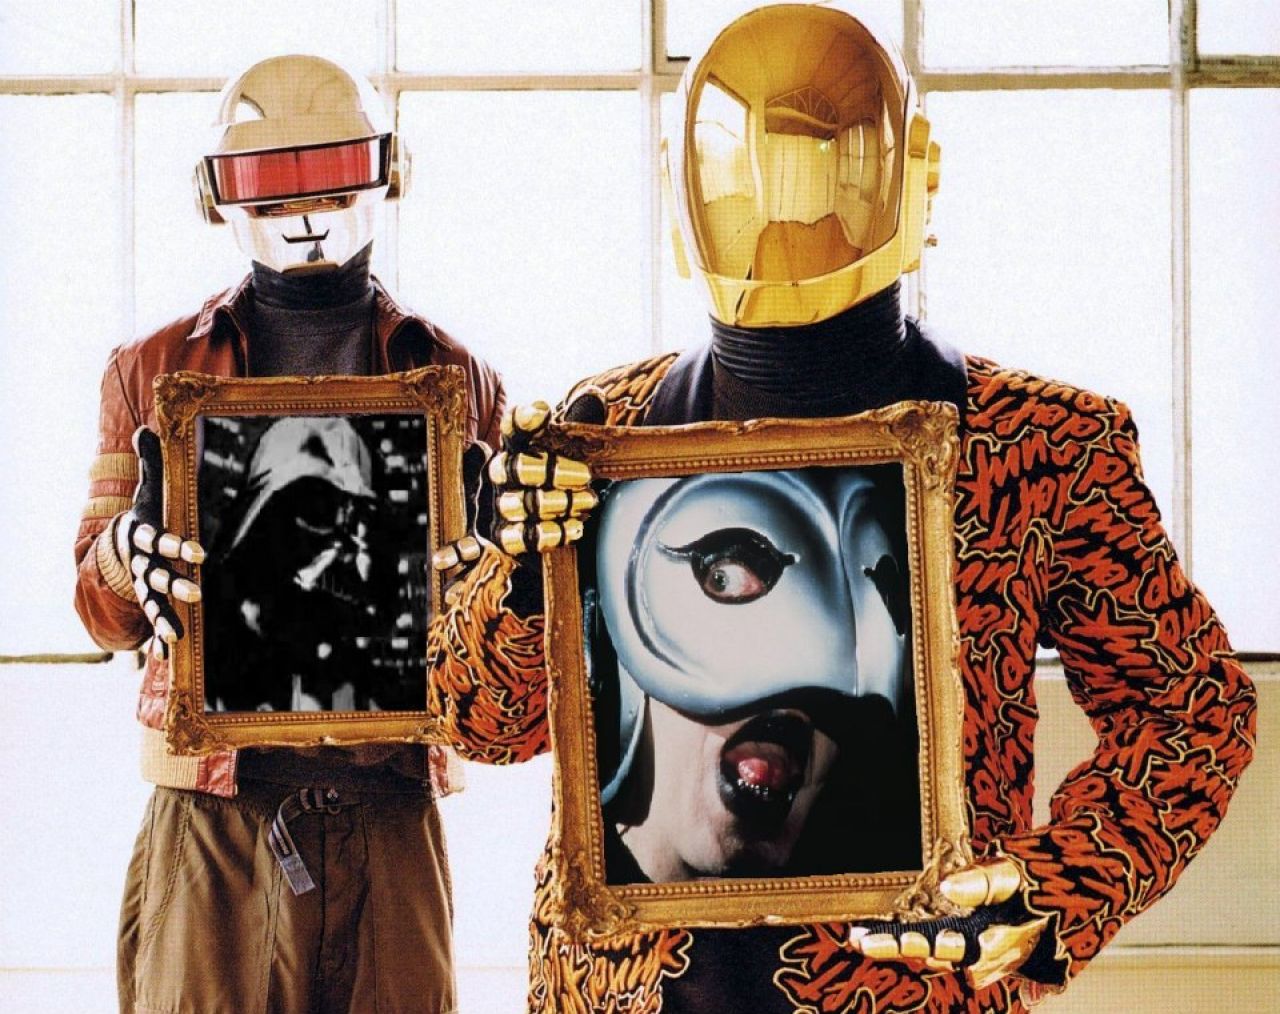 How Daft Punk's robots were crafted, in the words of their collaborators